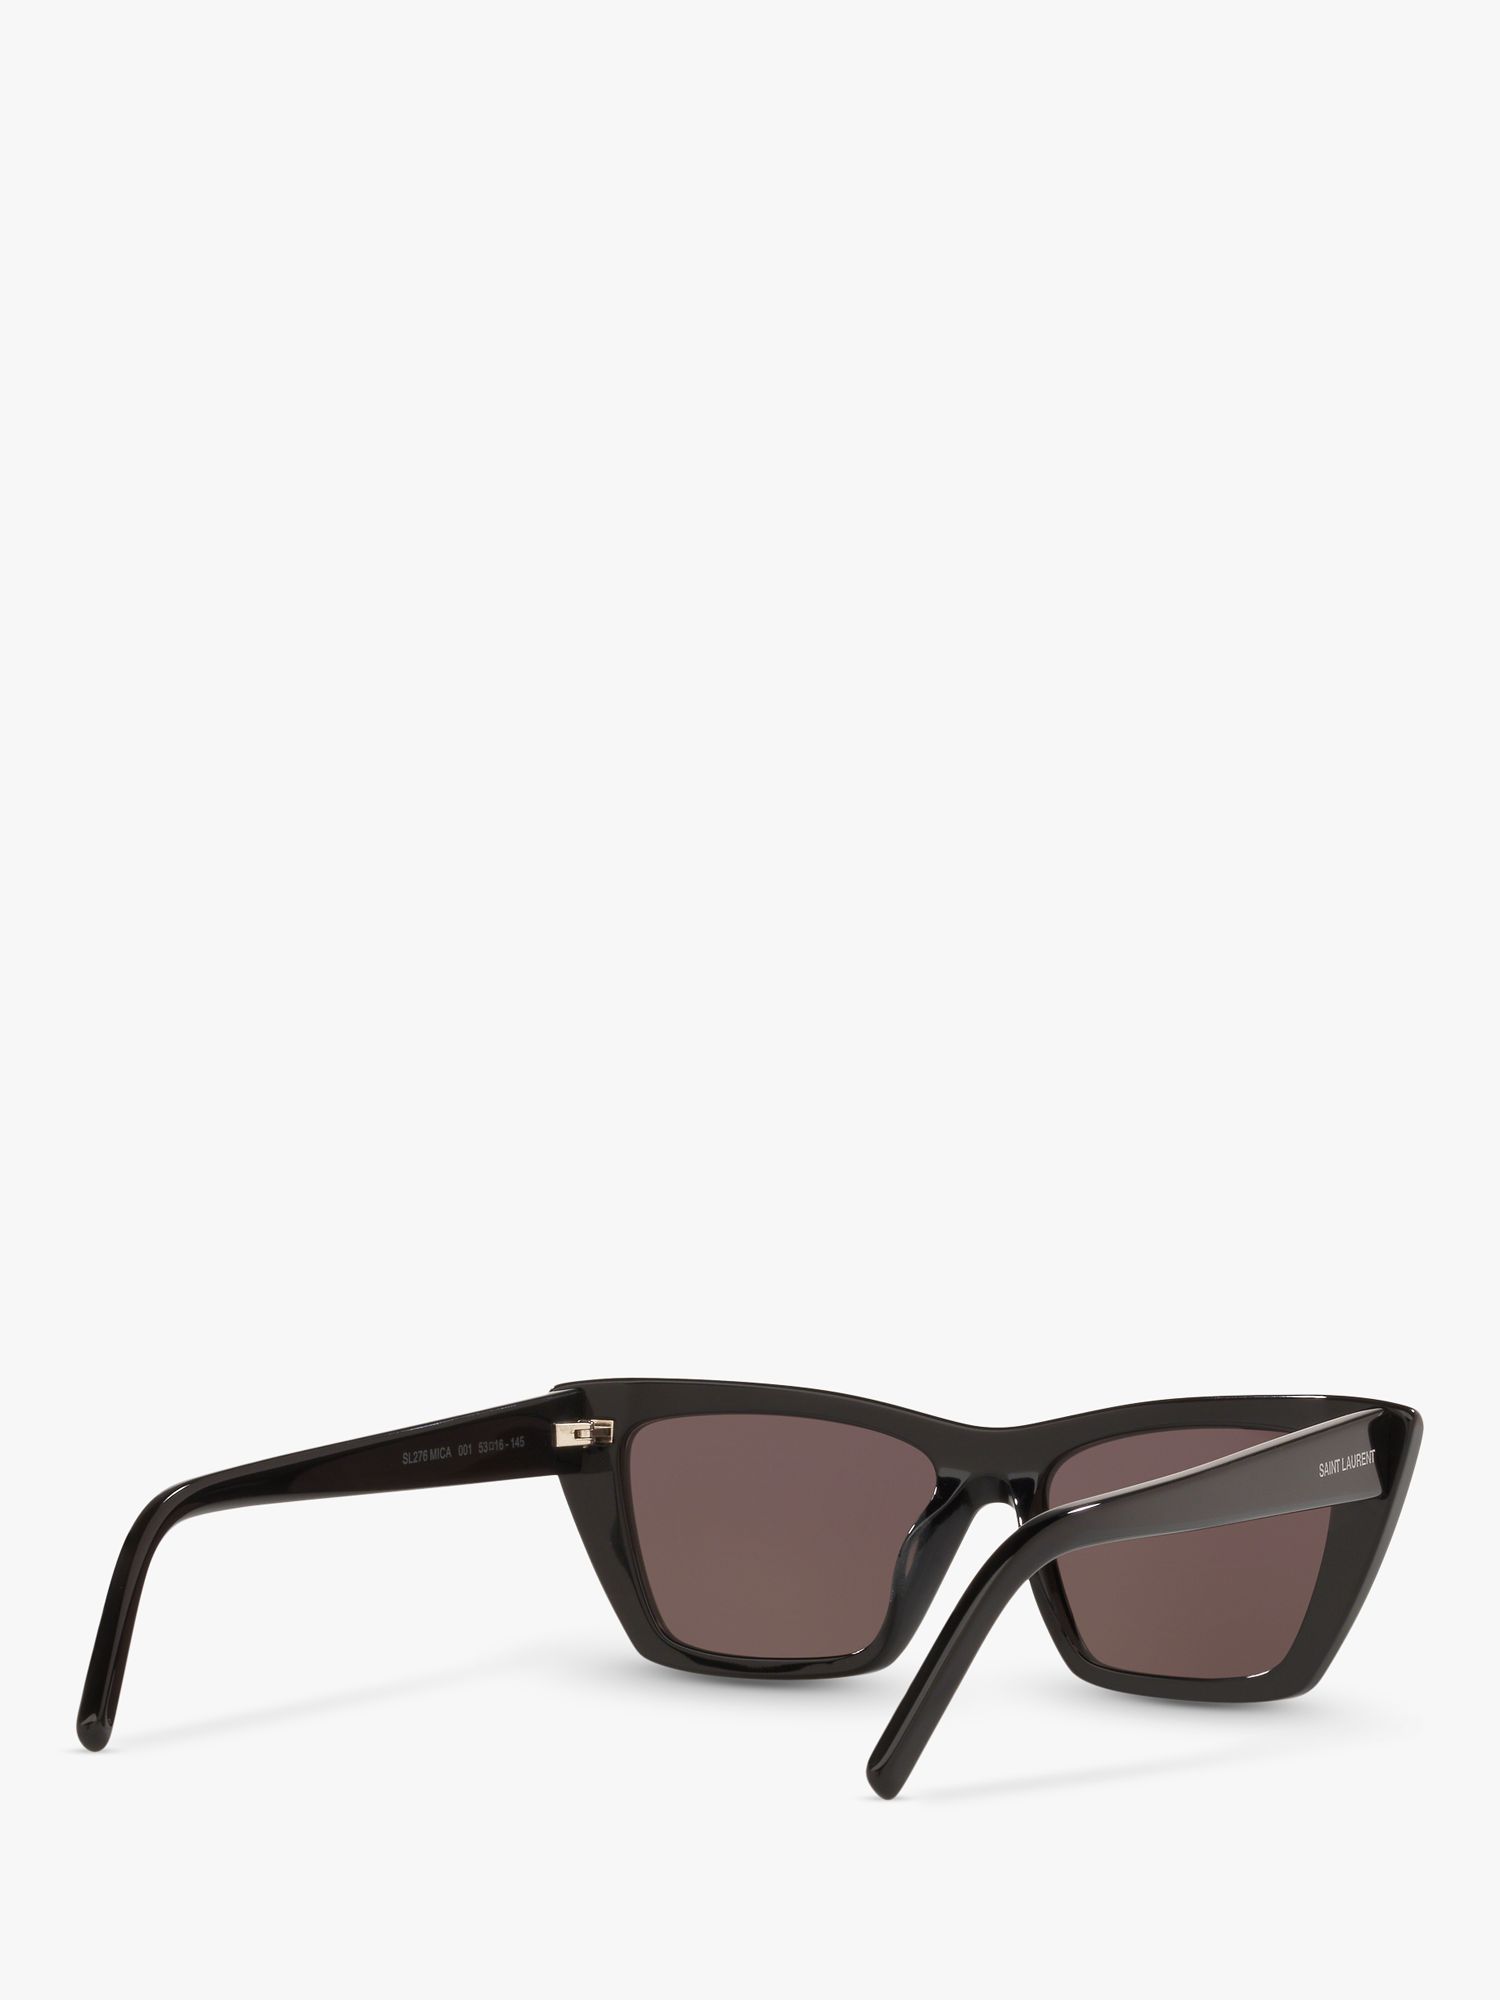 Love Molly-Mae's Saint Laurent Mica sunglasses? & Other Stories